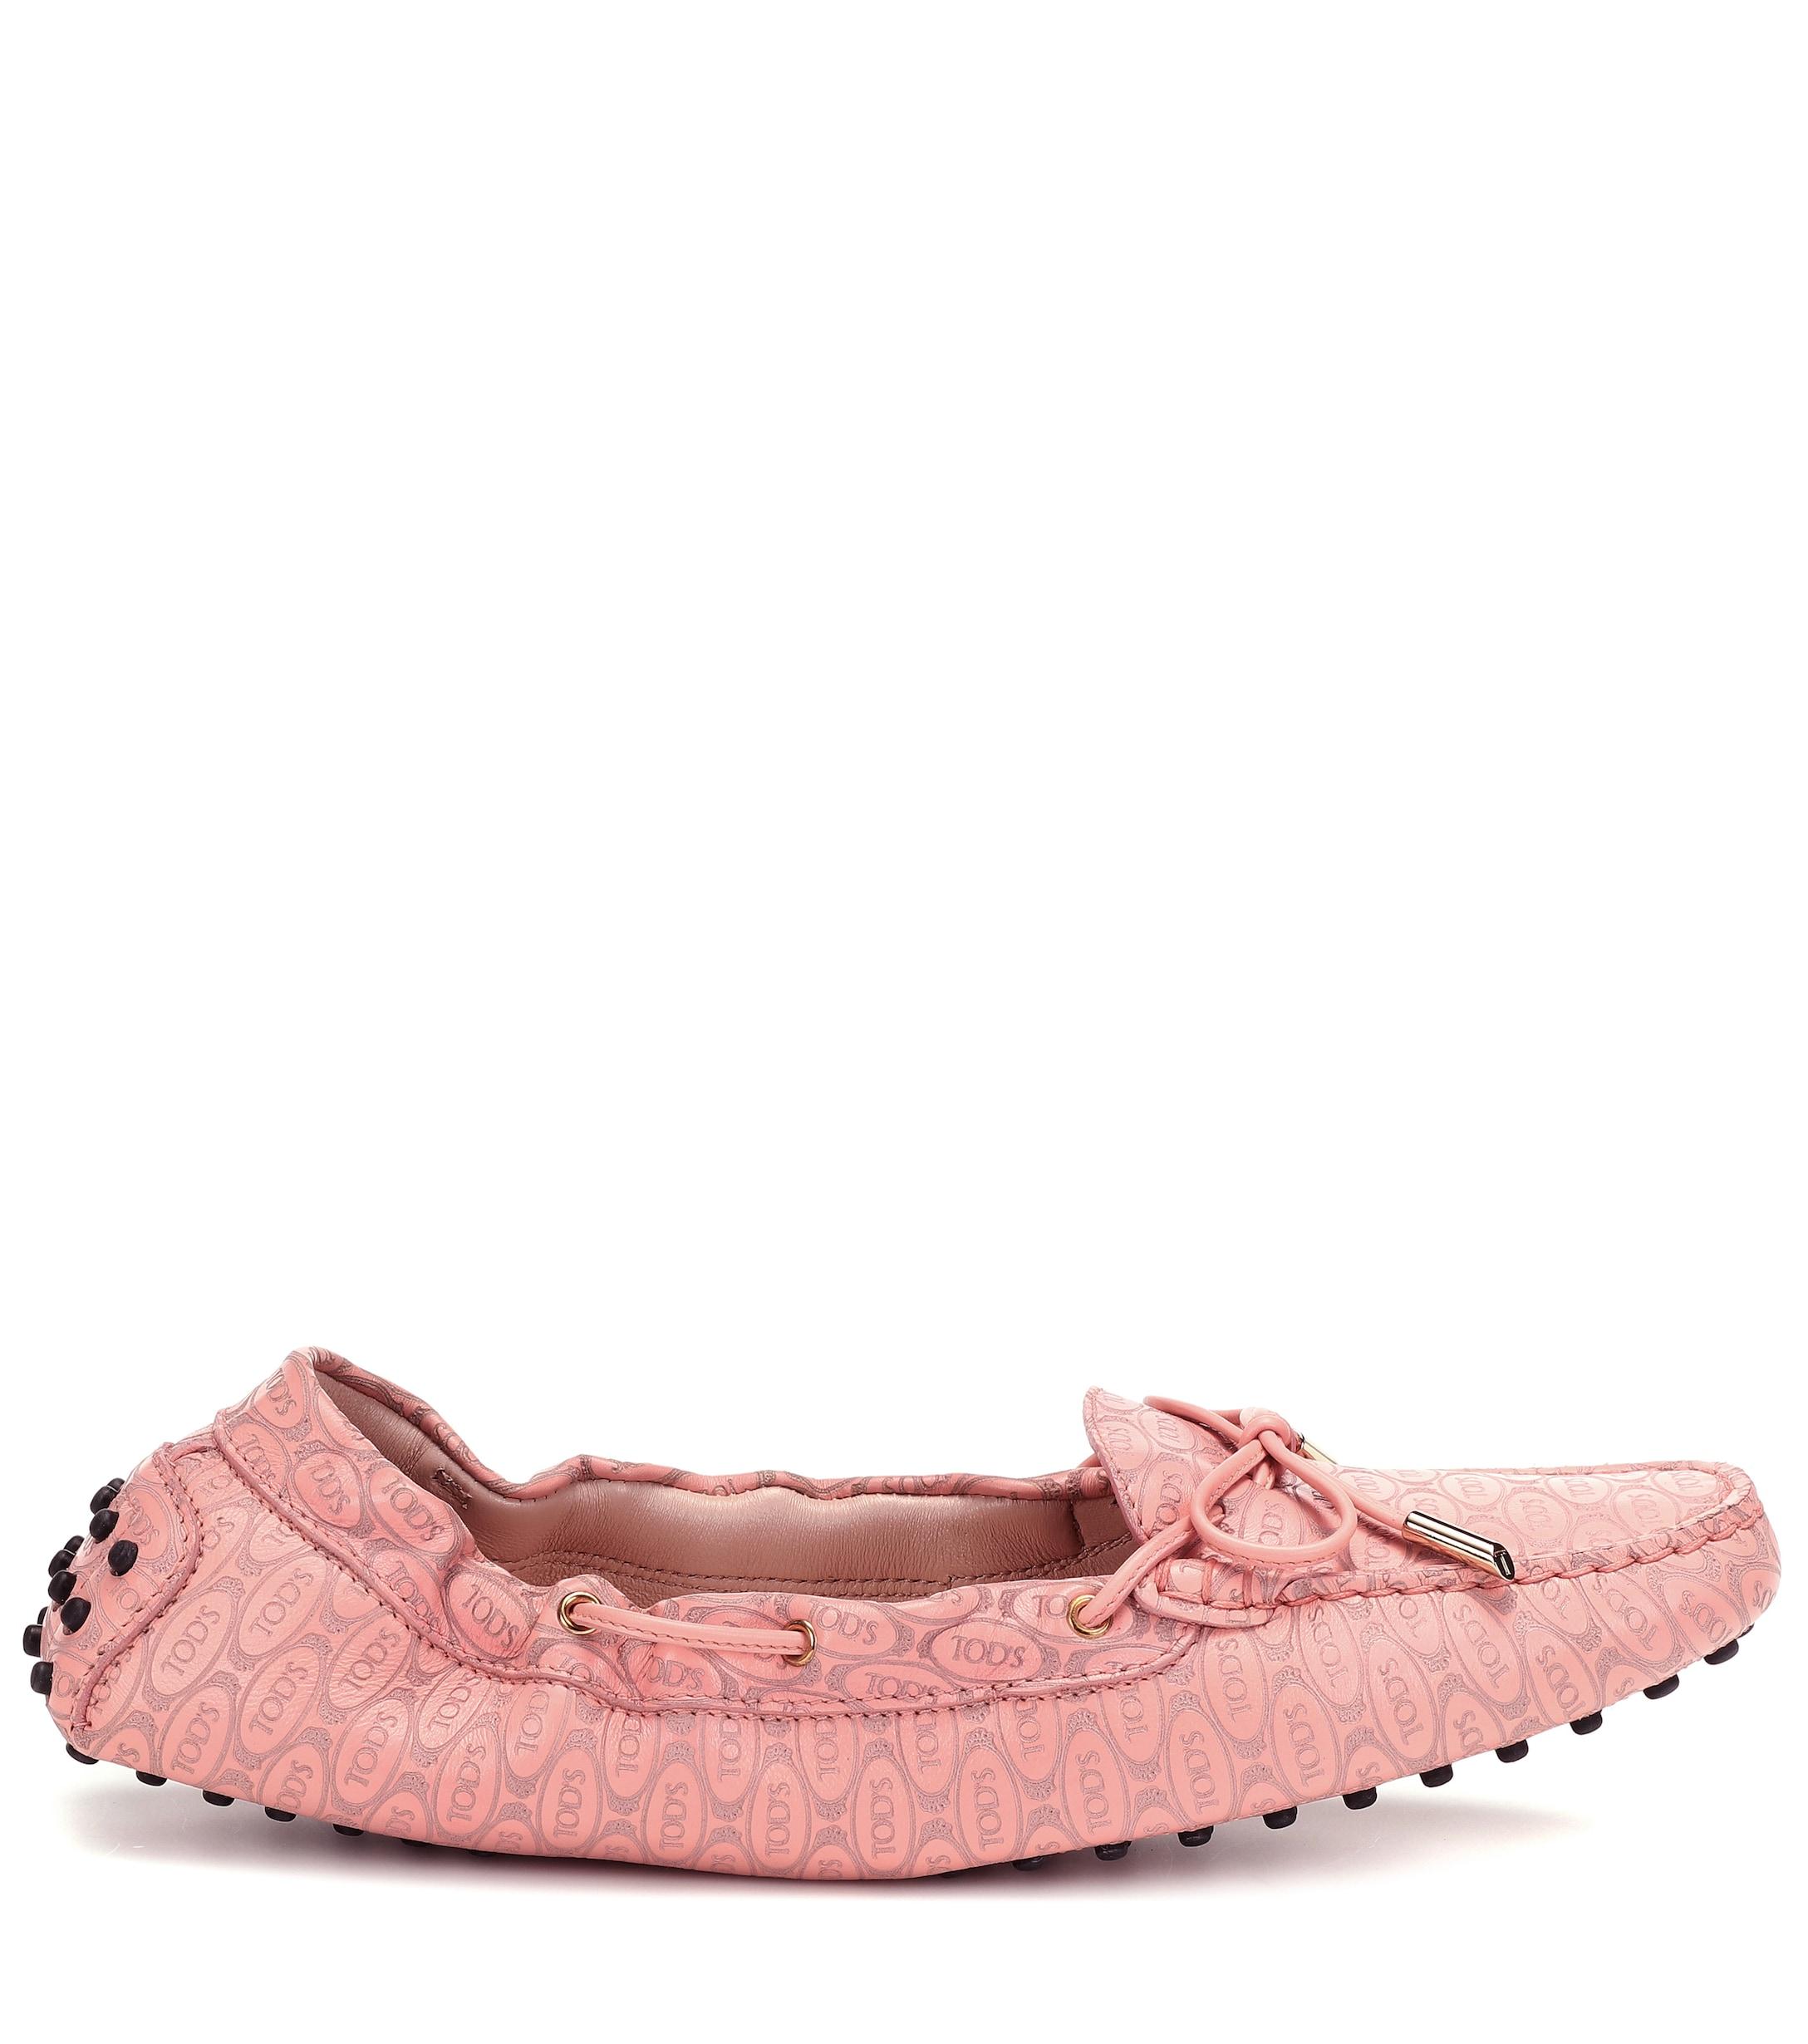 Tod's Gommino Leather Moccasins in Pink - Lyst